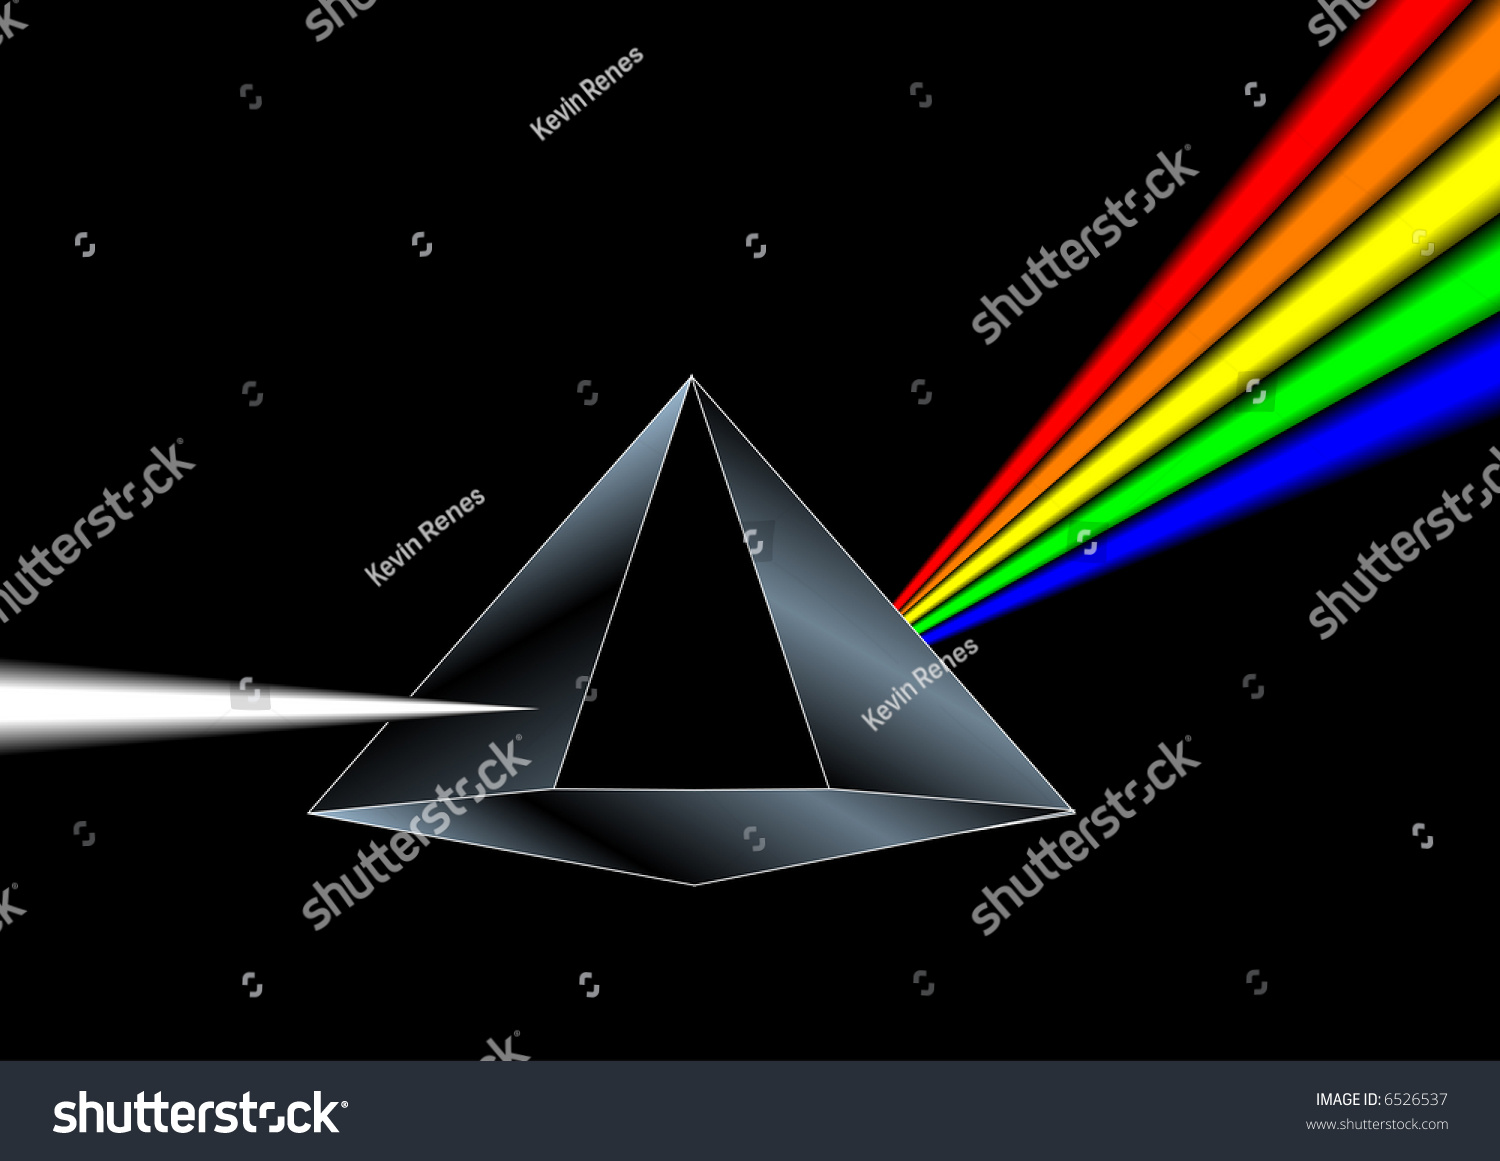 Vector Of A Prism - 6526537 : Shutterstock